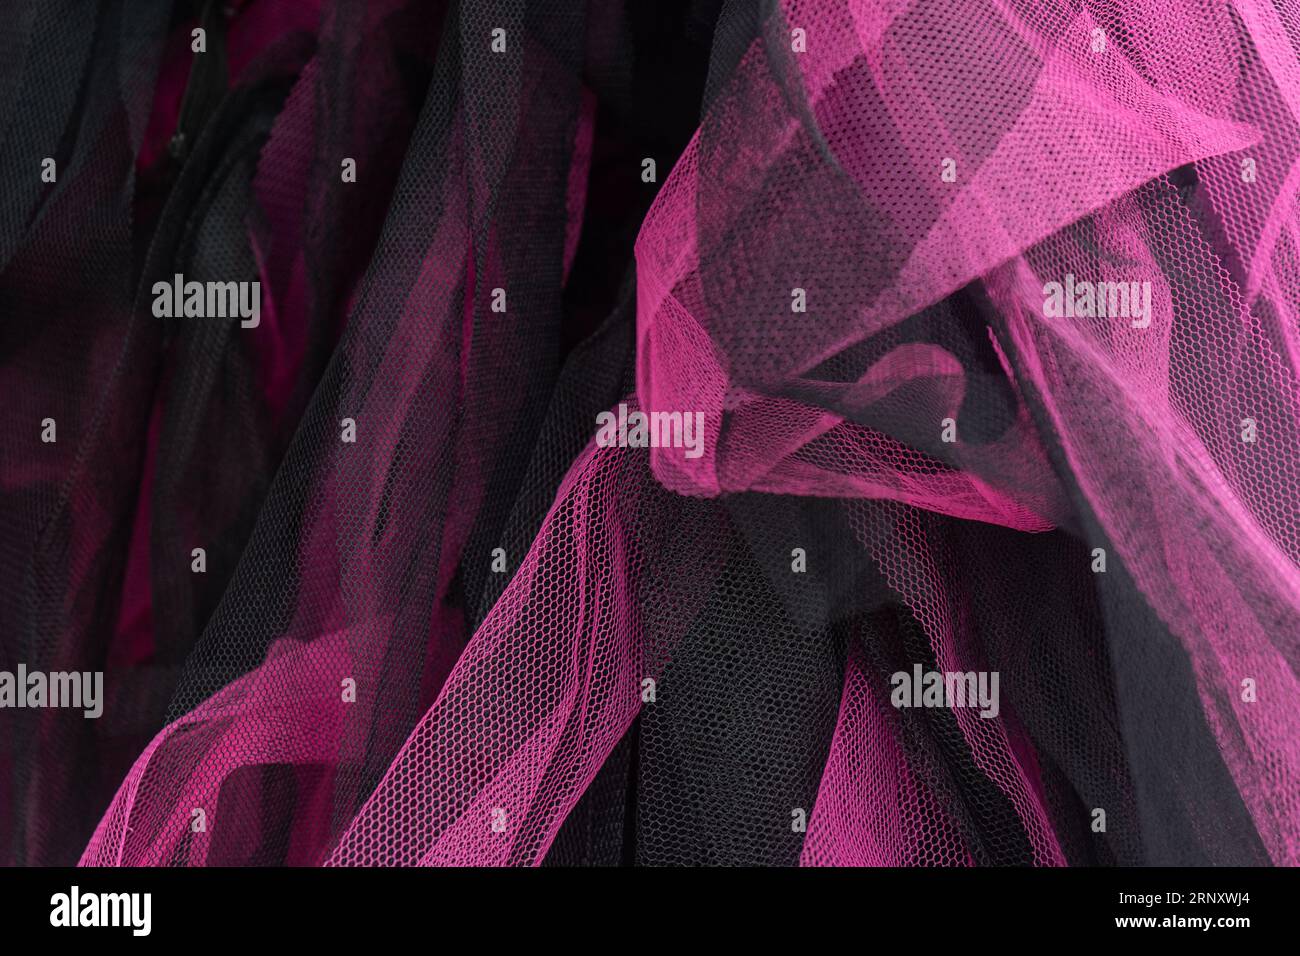 Tulle fabric in black and fuchsia Stock Photo